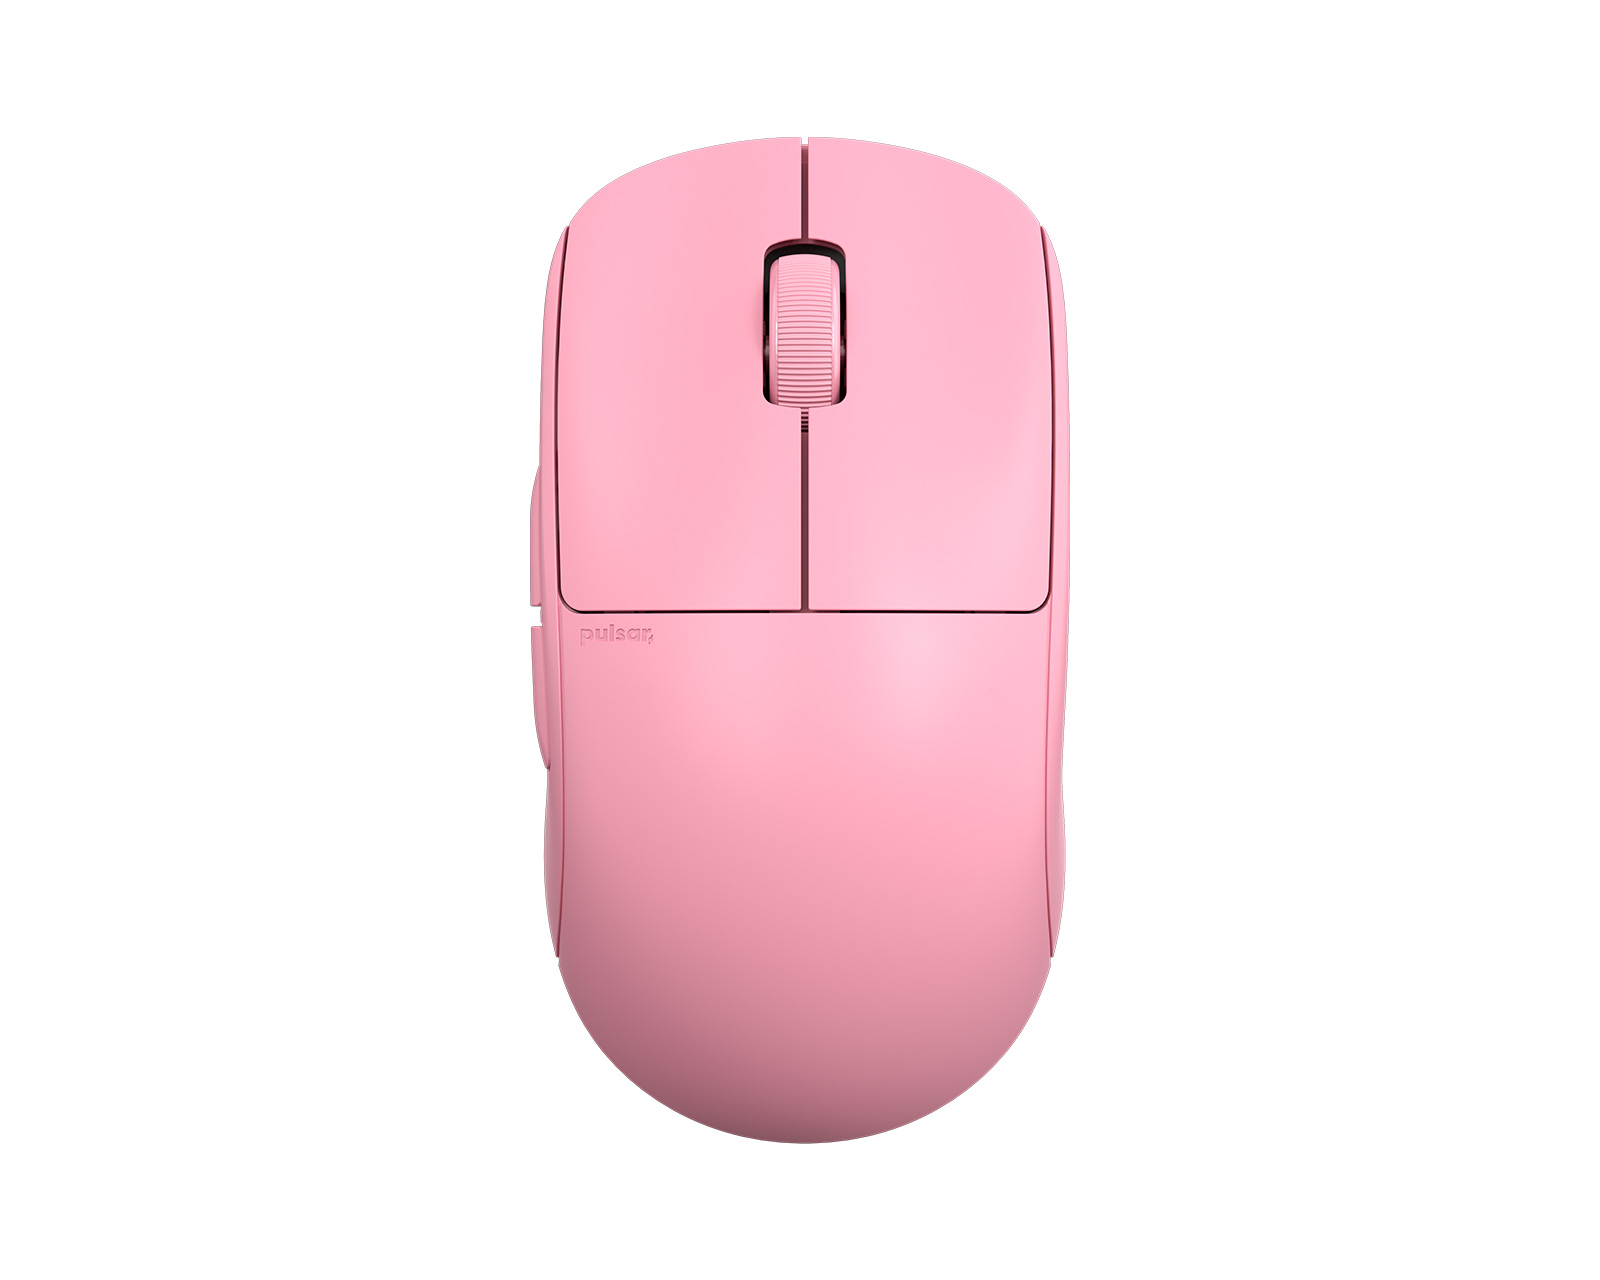 Pulsar X2 Wireless Gaming Mouse - Pink